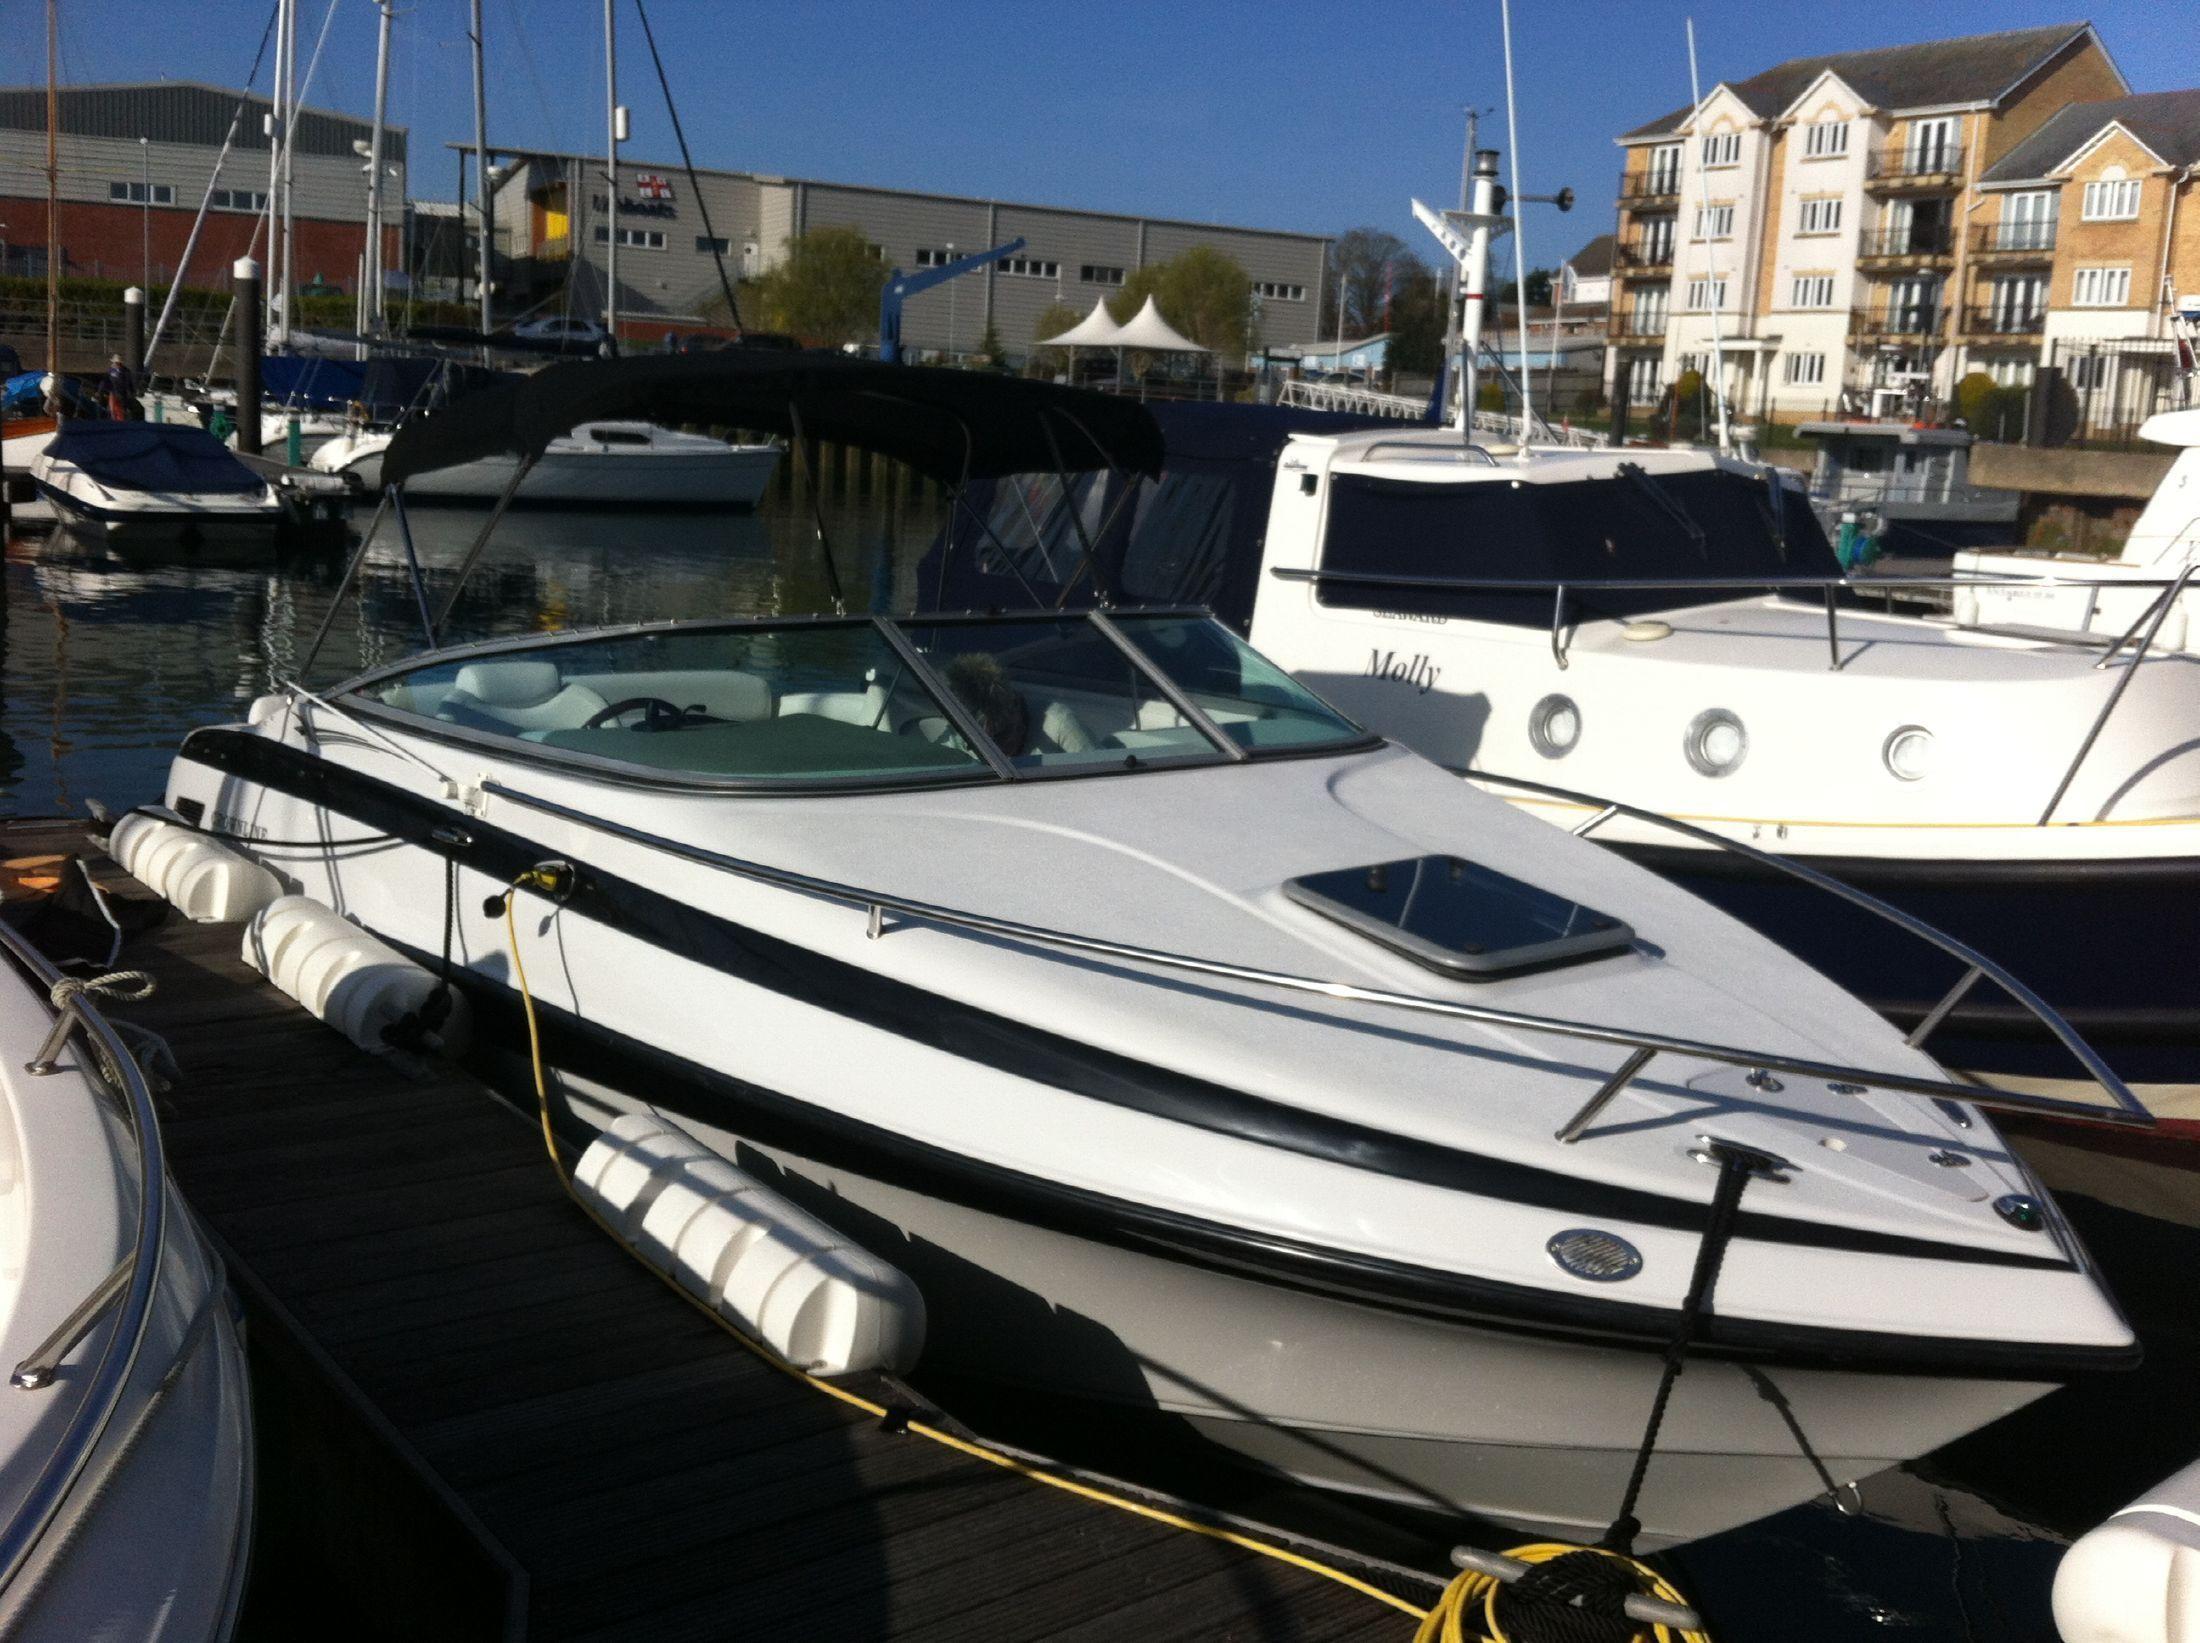 Crownline 220 CCR, East Cowes Marina, Isle of Wight